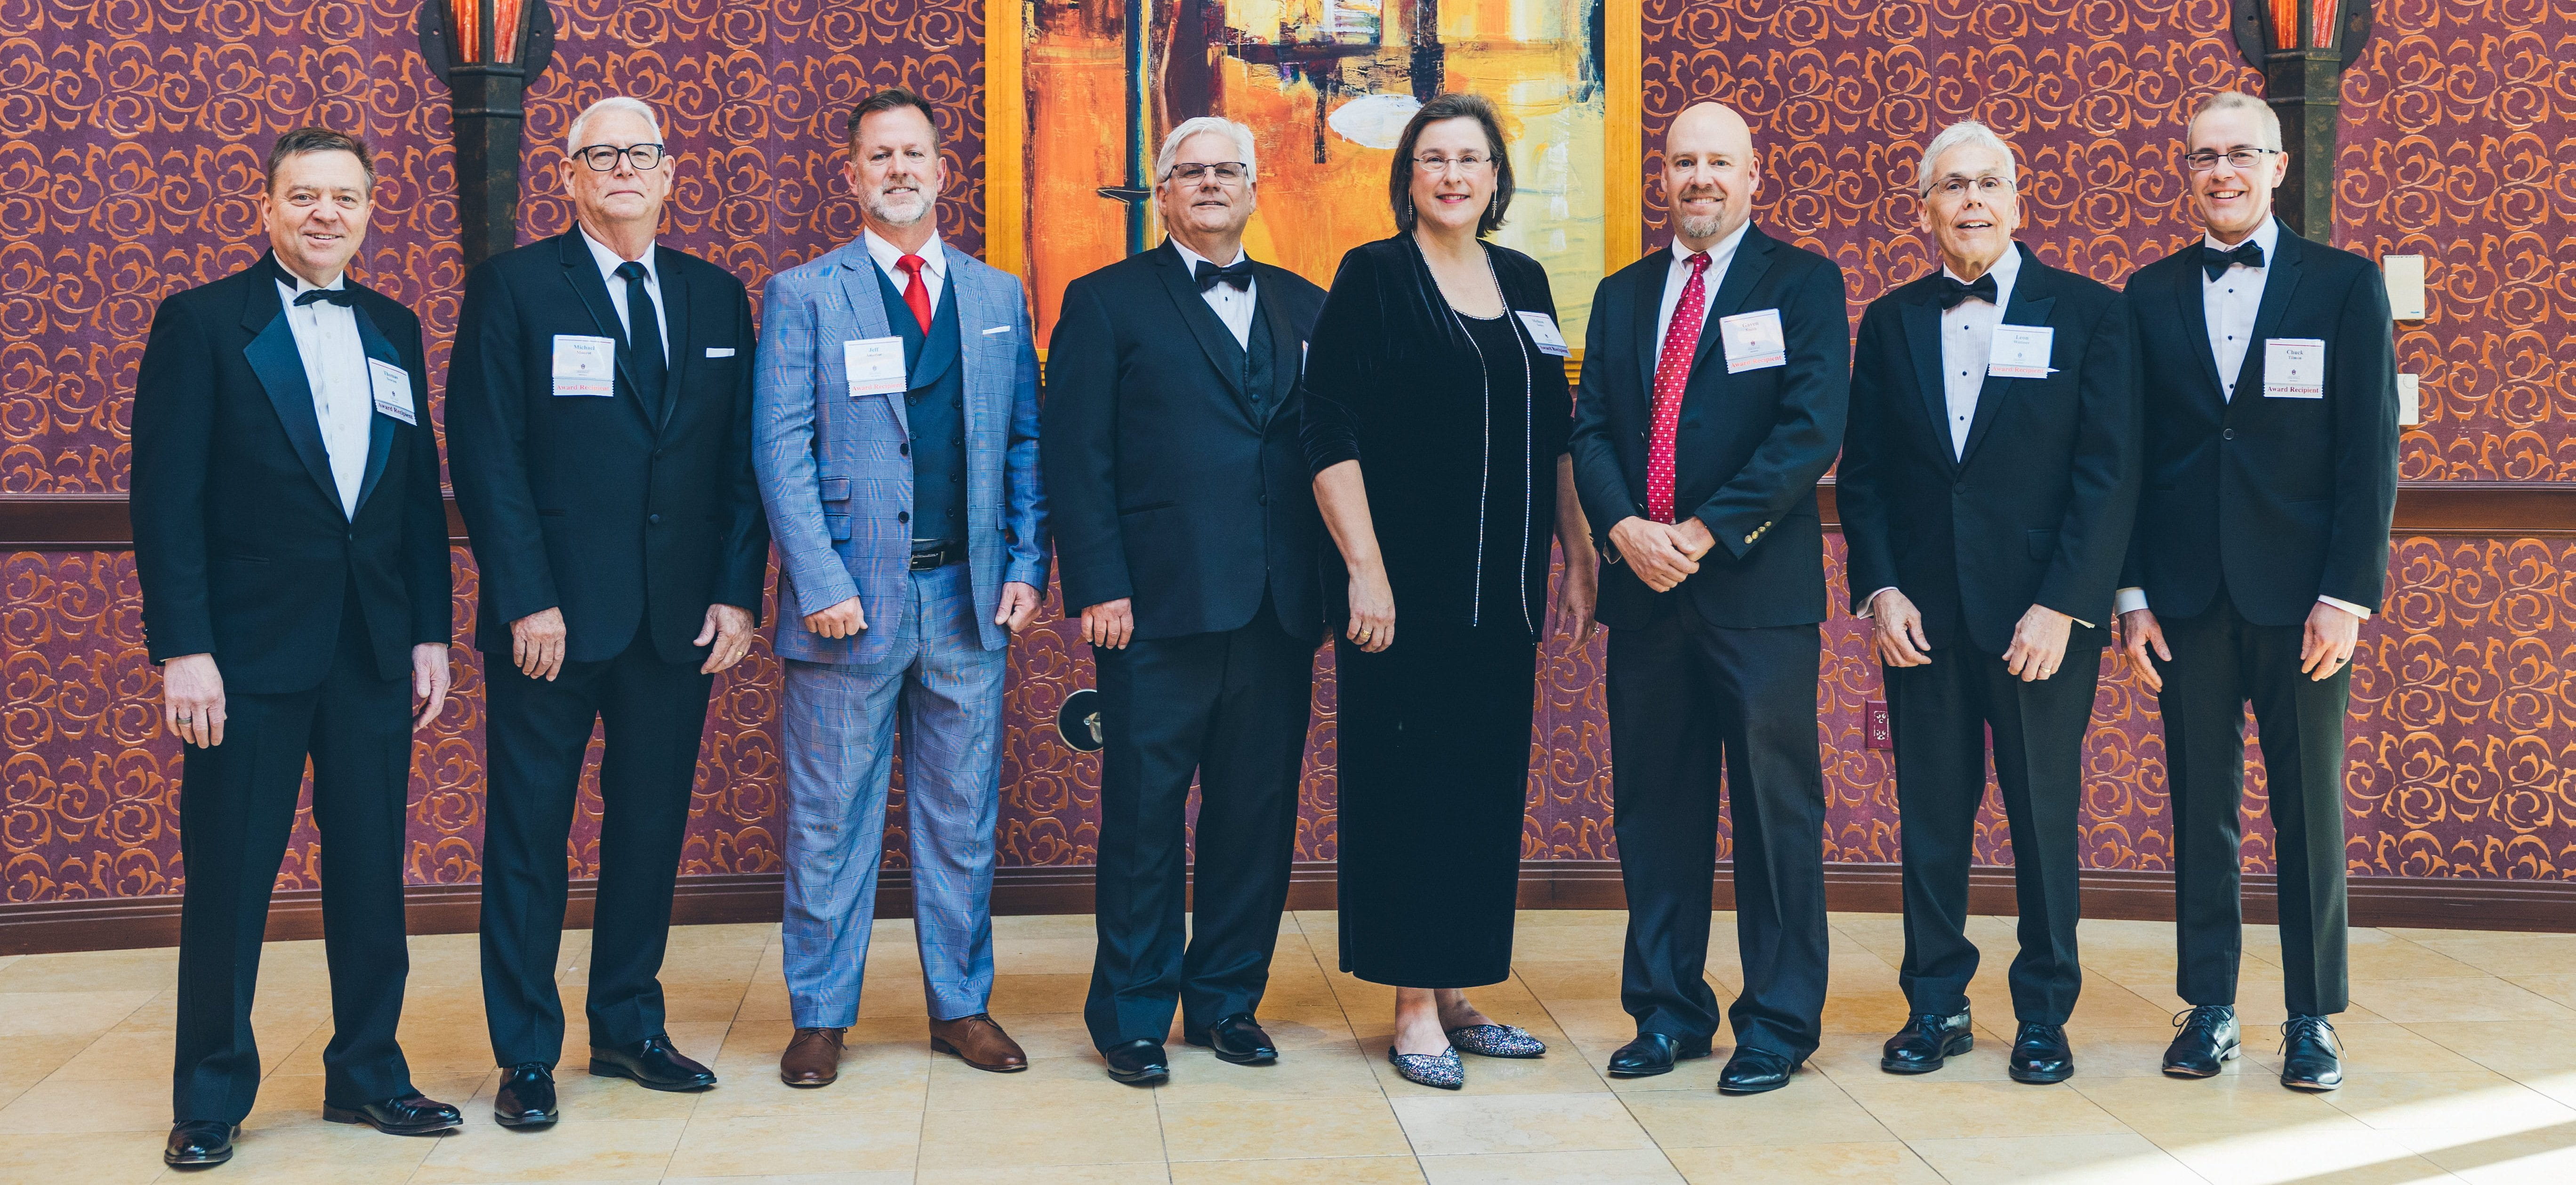 Pictured, left to right, are Distinguished Alumni Award recipients Thomas Newton, Michael Mourot, Jeff Amerine, Brad Jackson, Melissa Summerlin Tooley, Gaven Smith, Leon Wittmer and Chuck Tilmon.